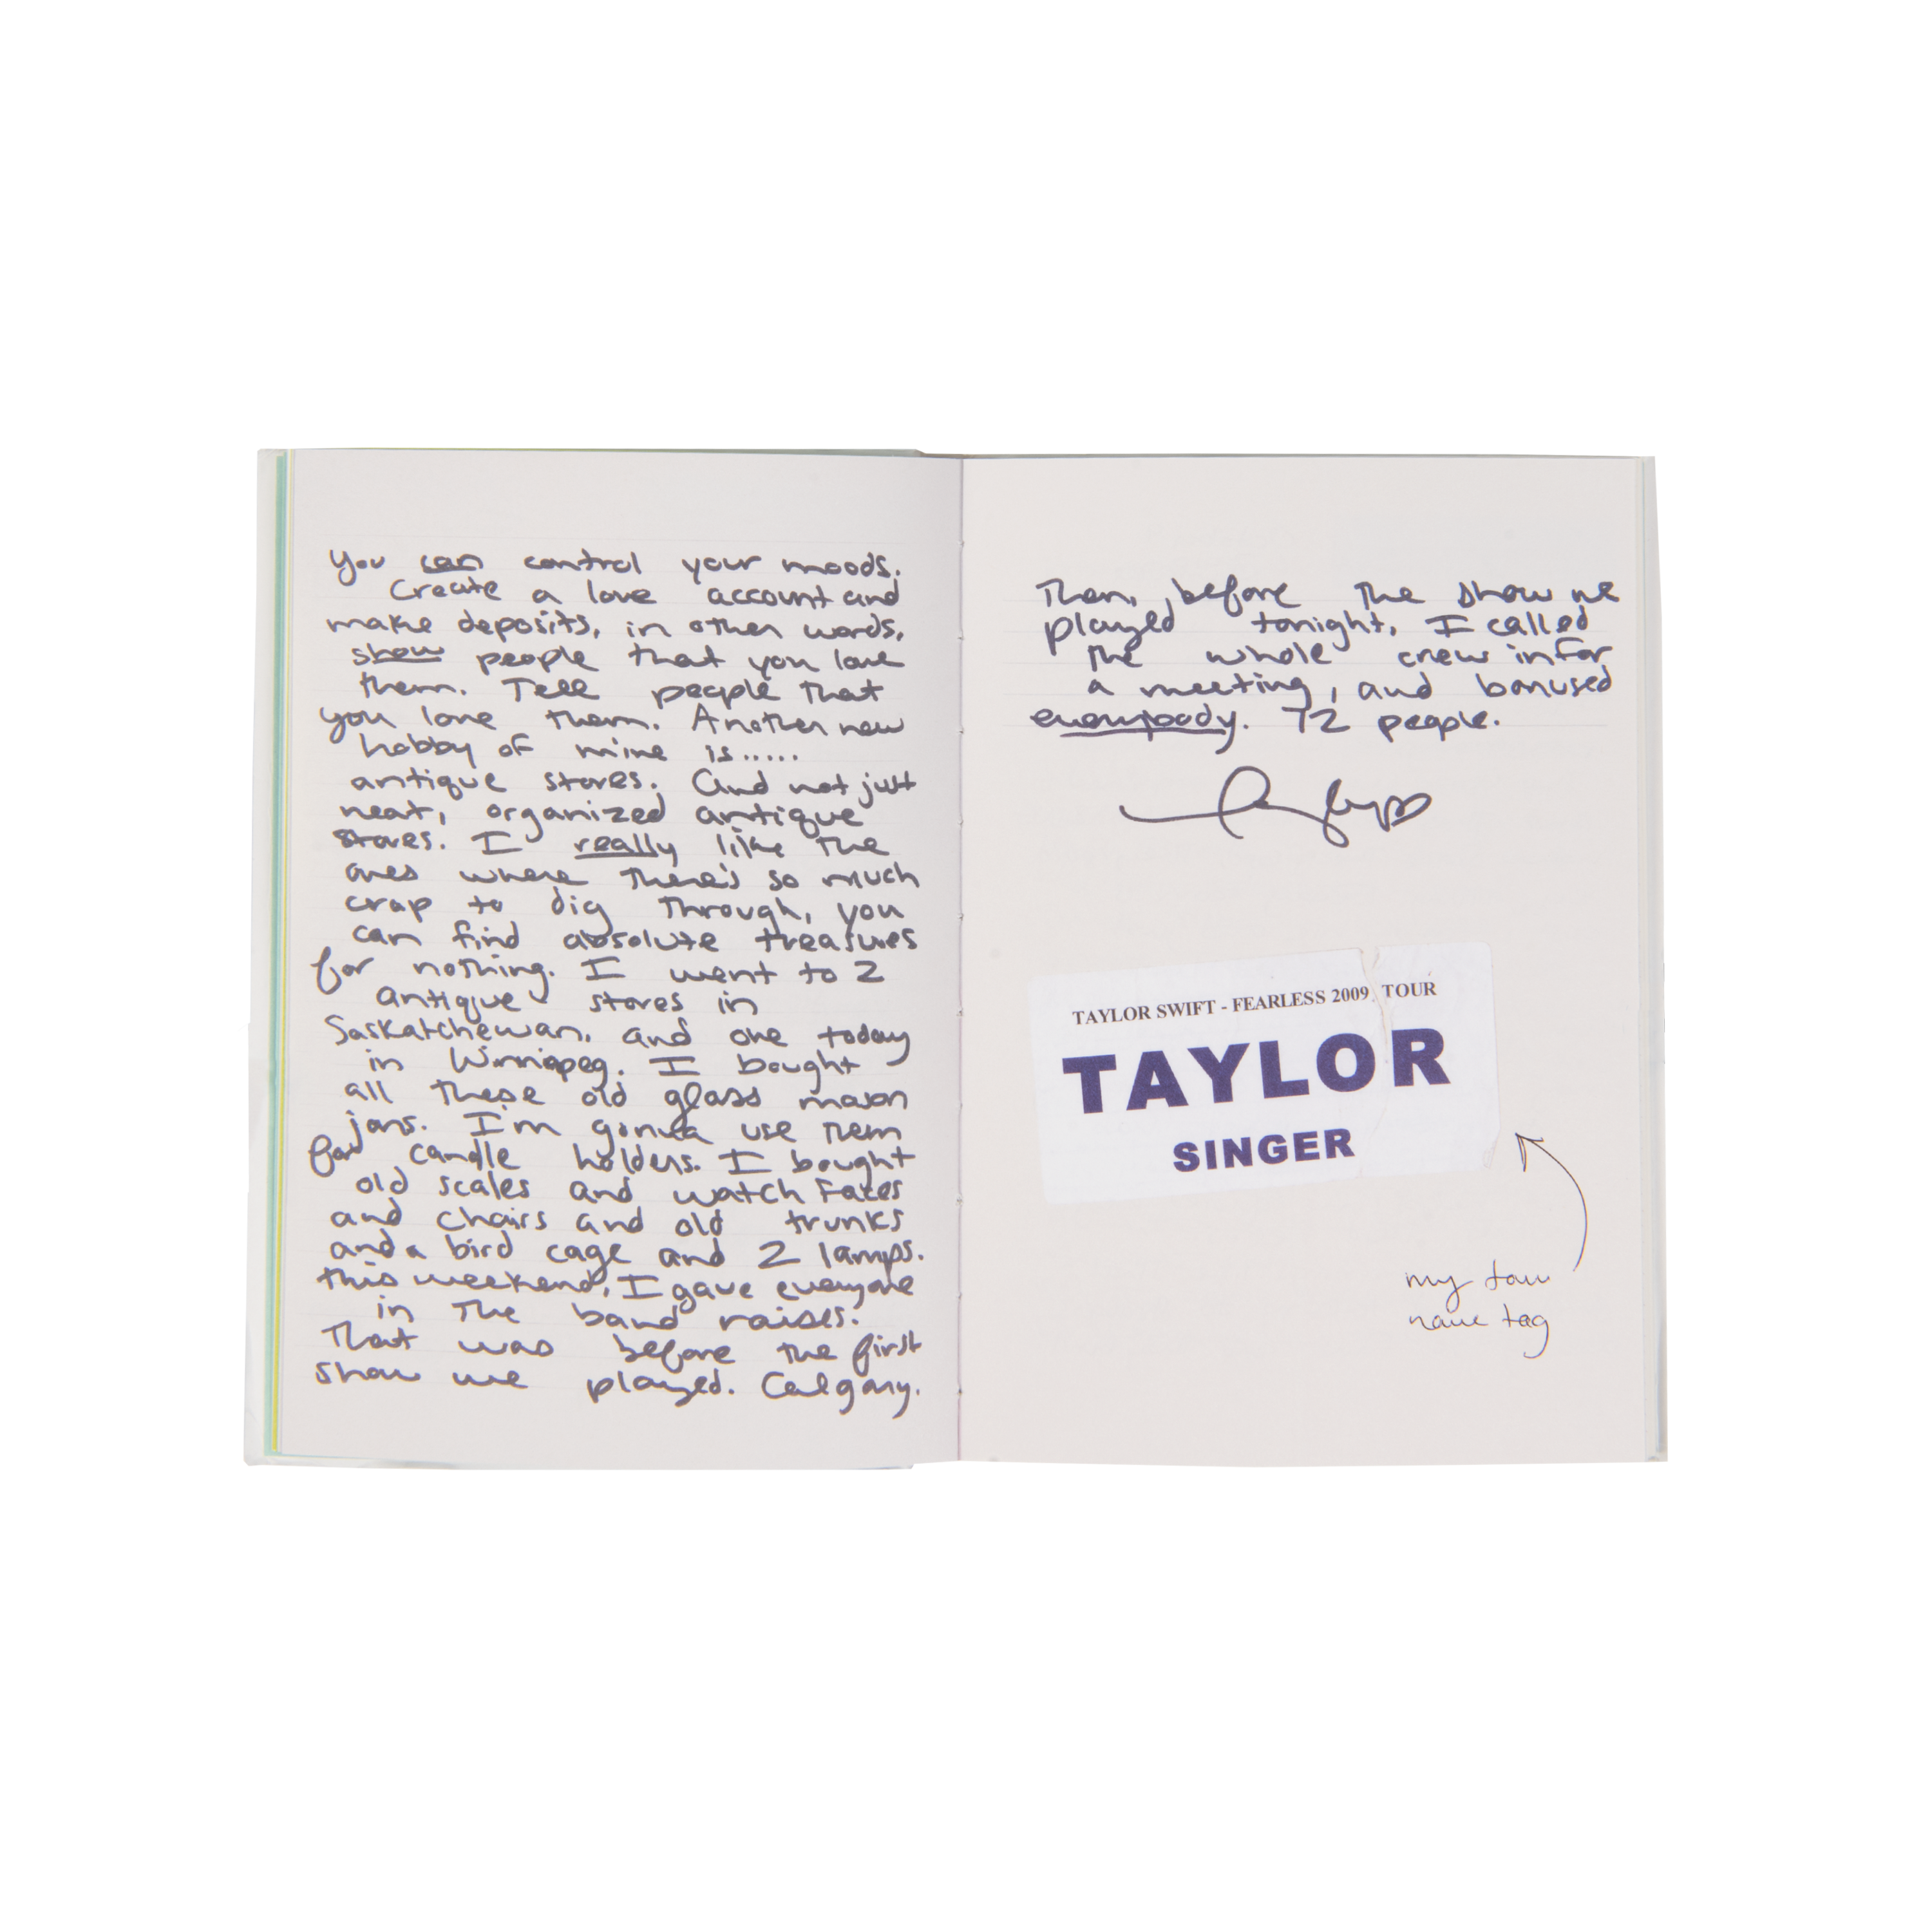 Lover CD Deluxe Version 2 Taylor's Journal